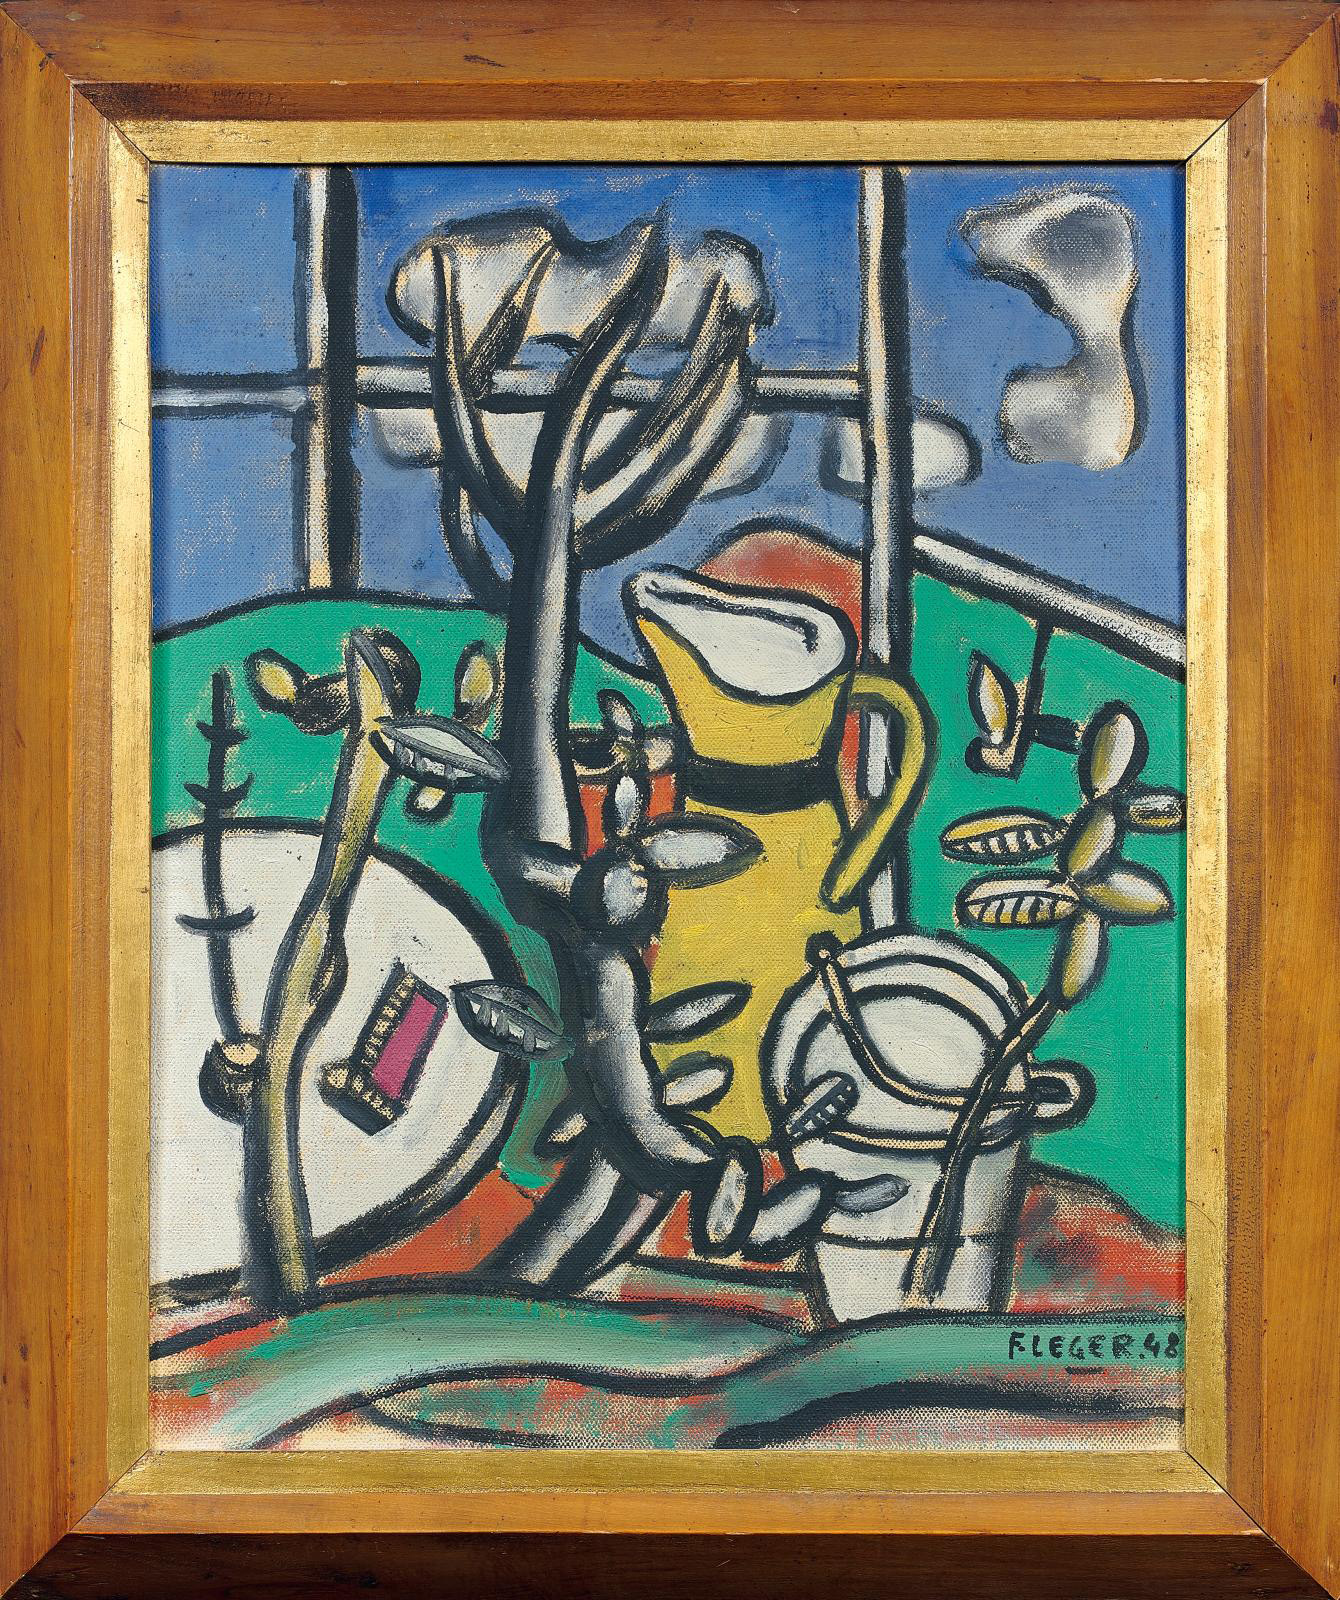 Fernand Léger, Modernity Mingles with Tradition